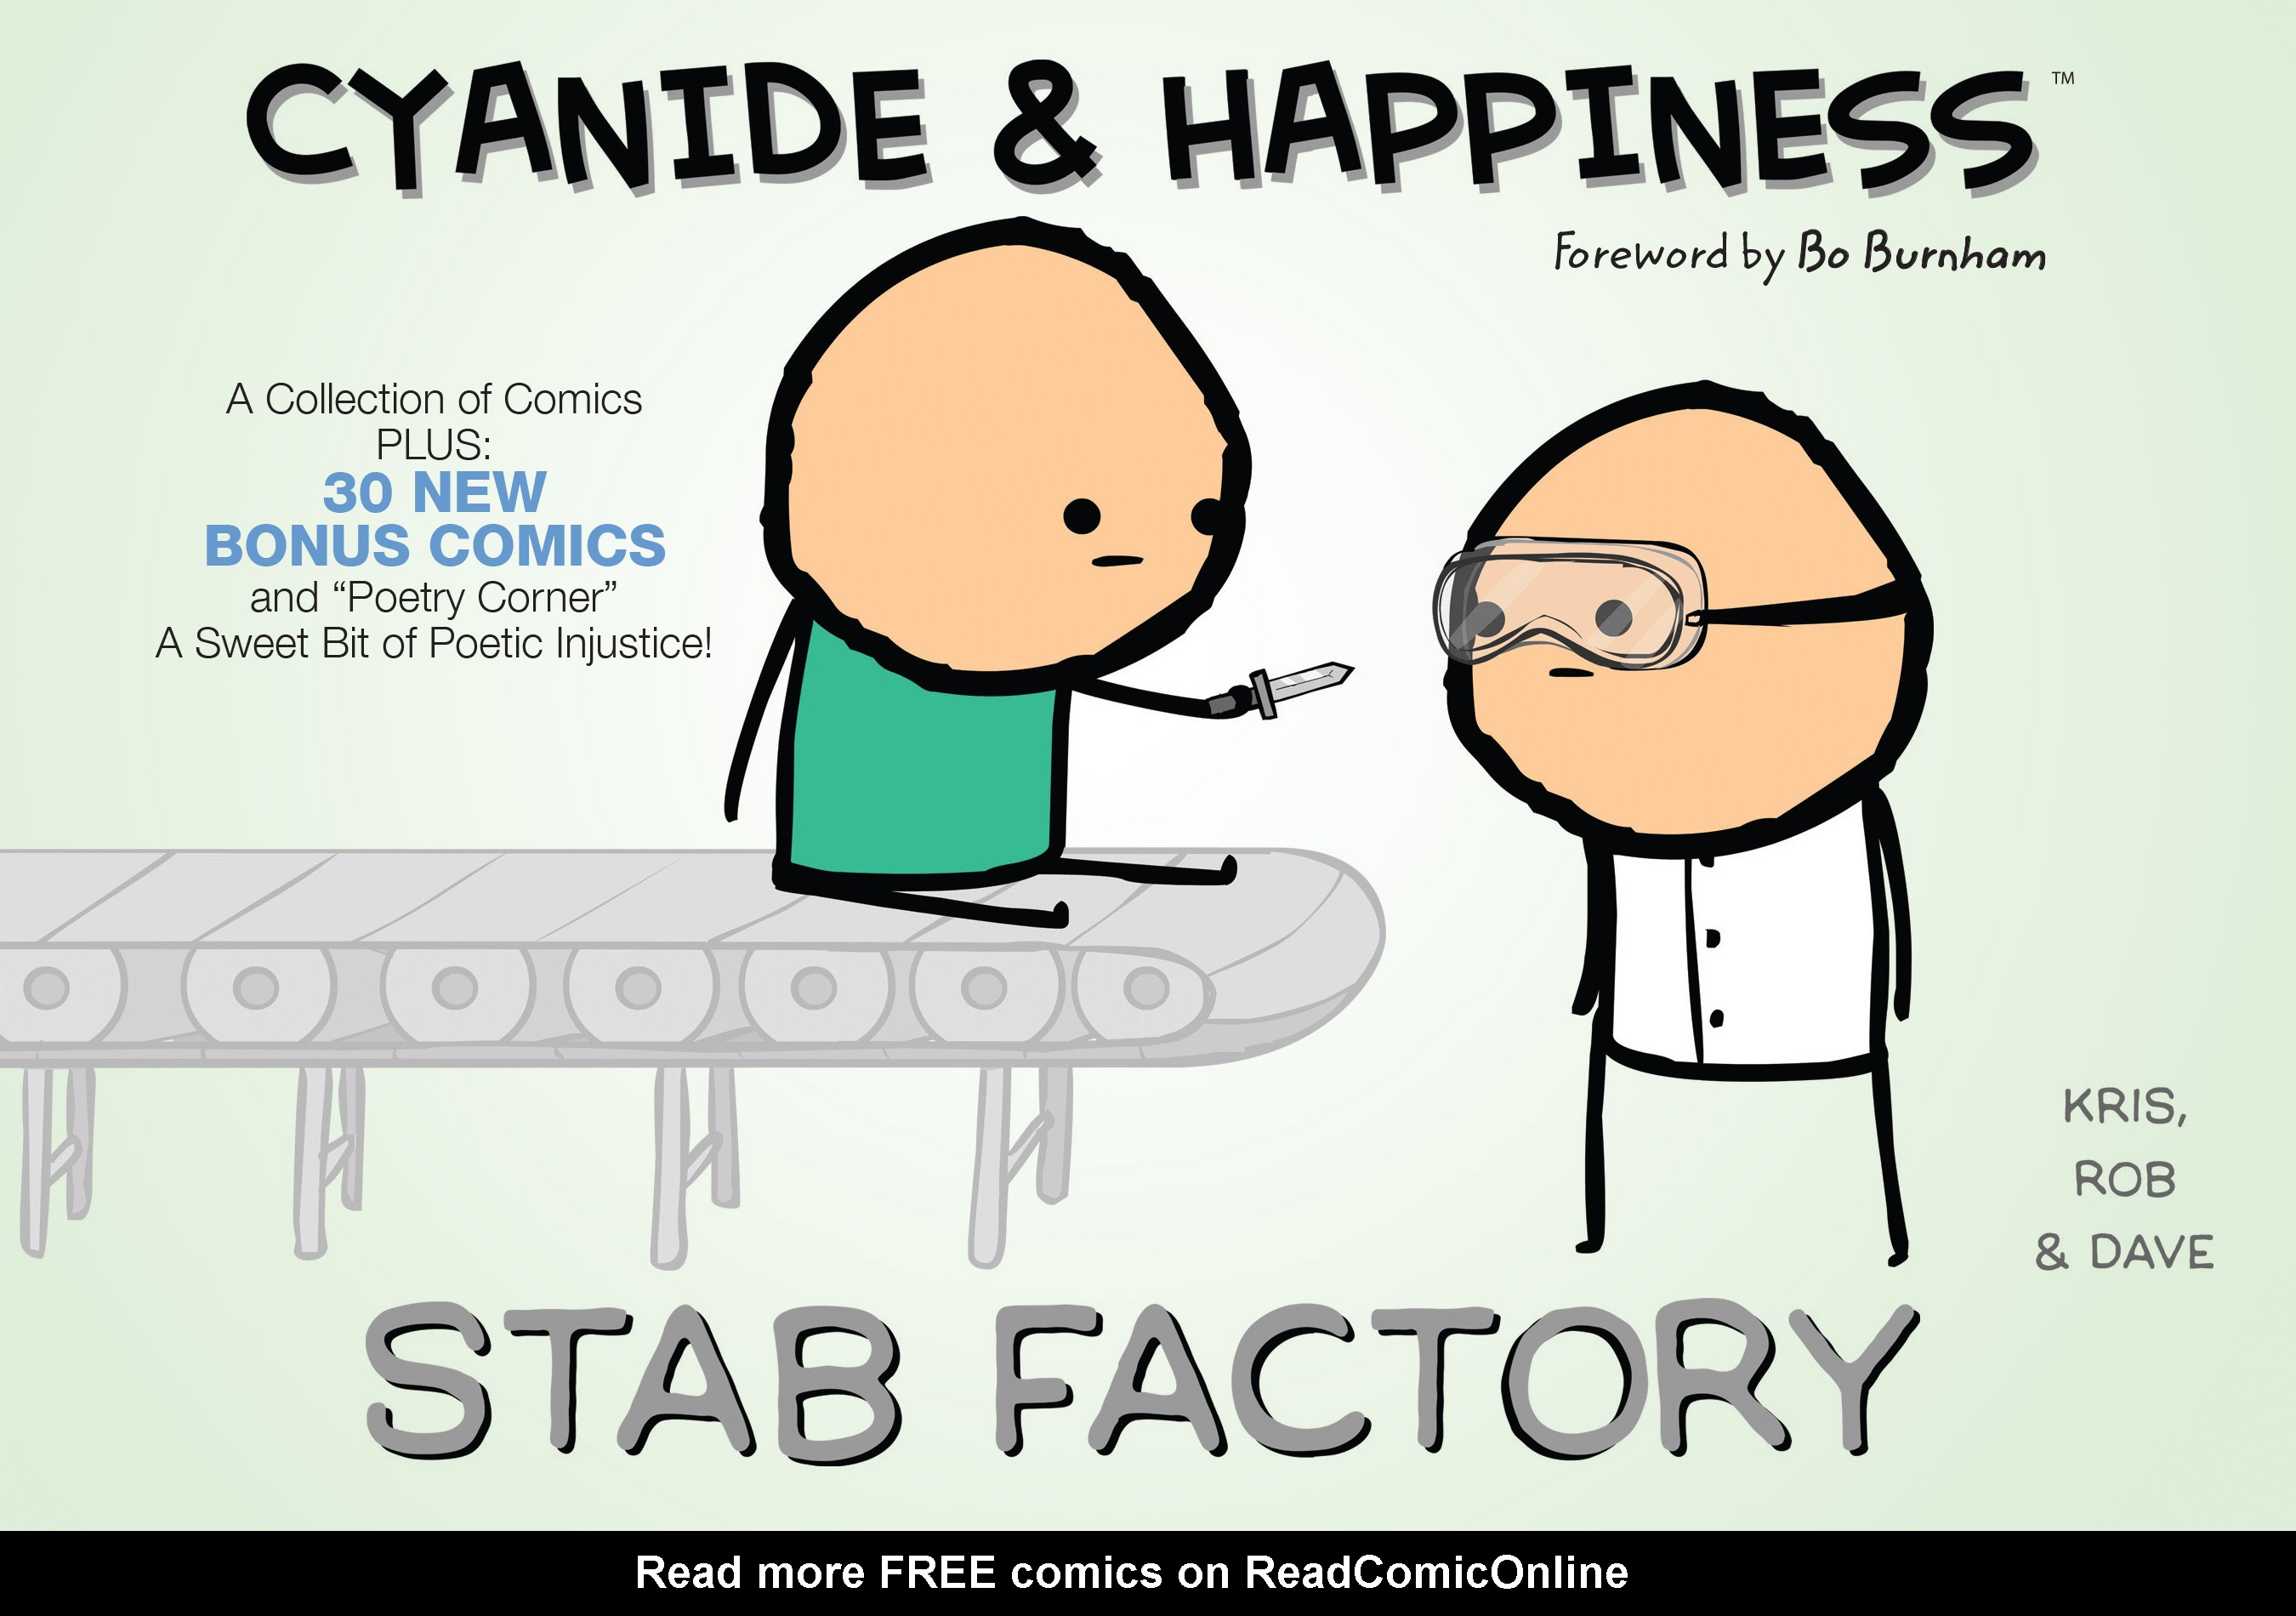 Read online Cyanide & Happiness: Stab Factory comic -  Issue # TPB - 1